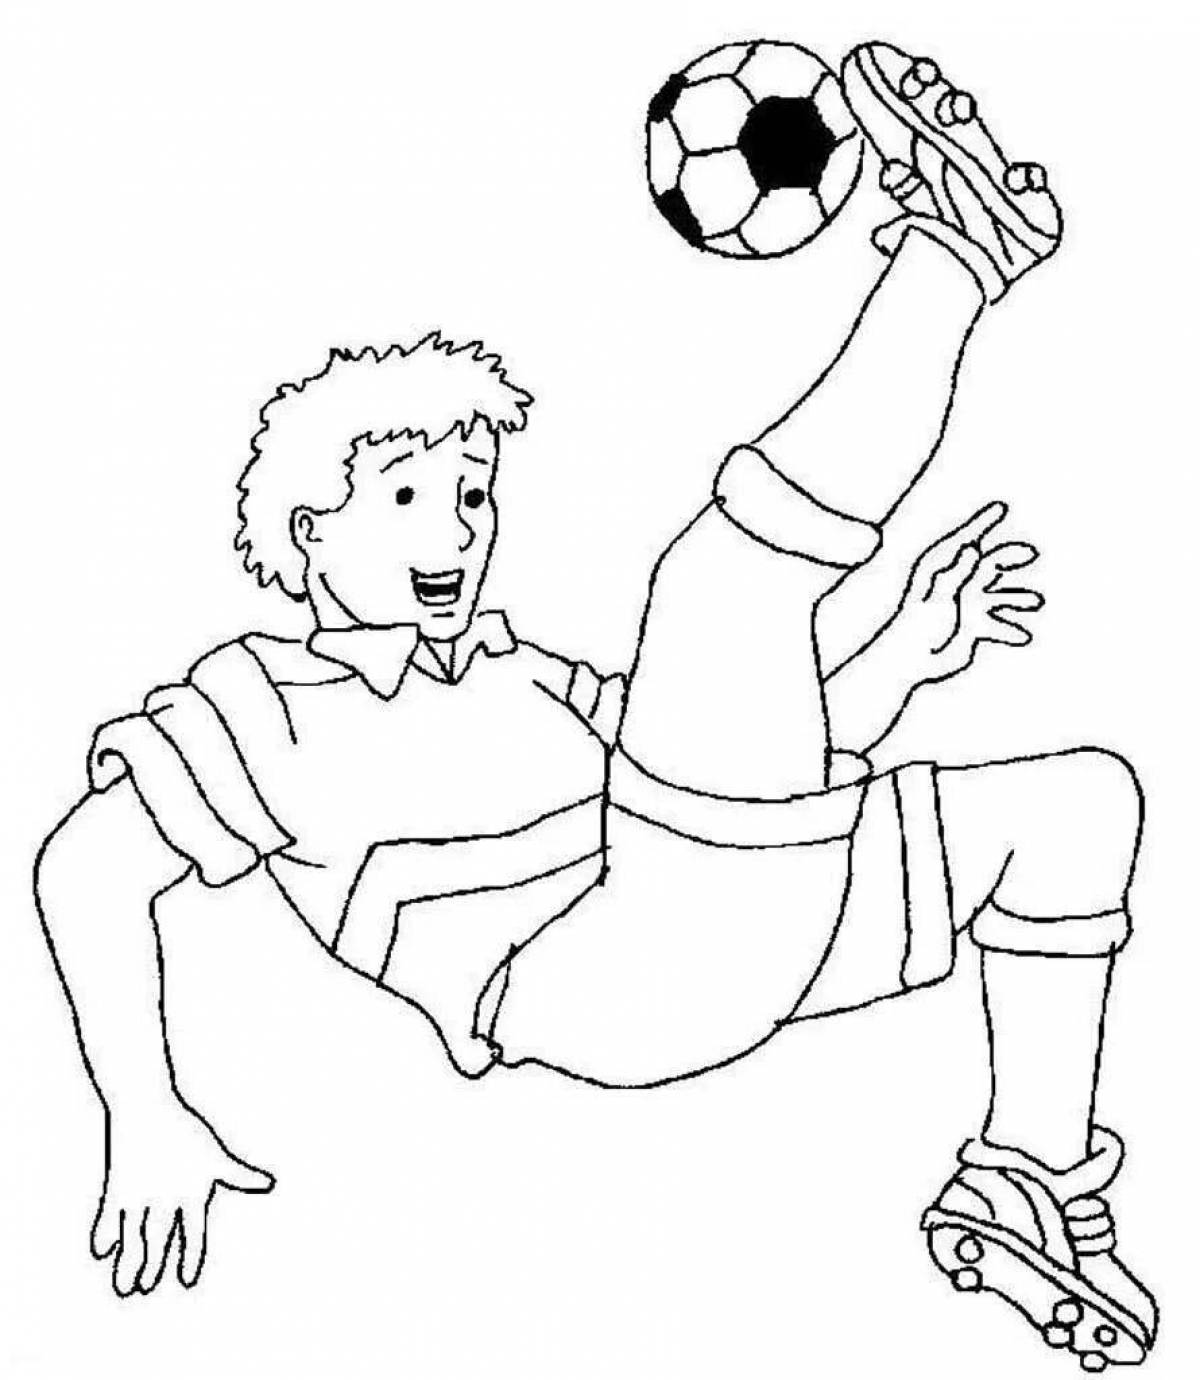 Fun football player coloring book for kids